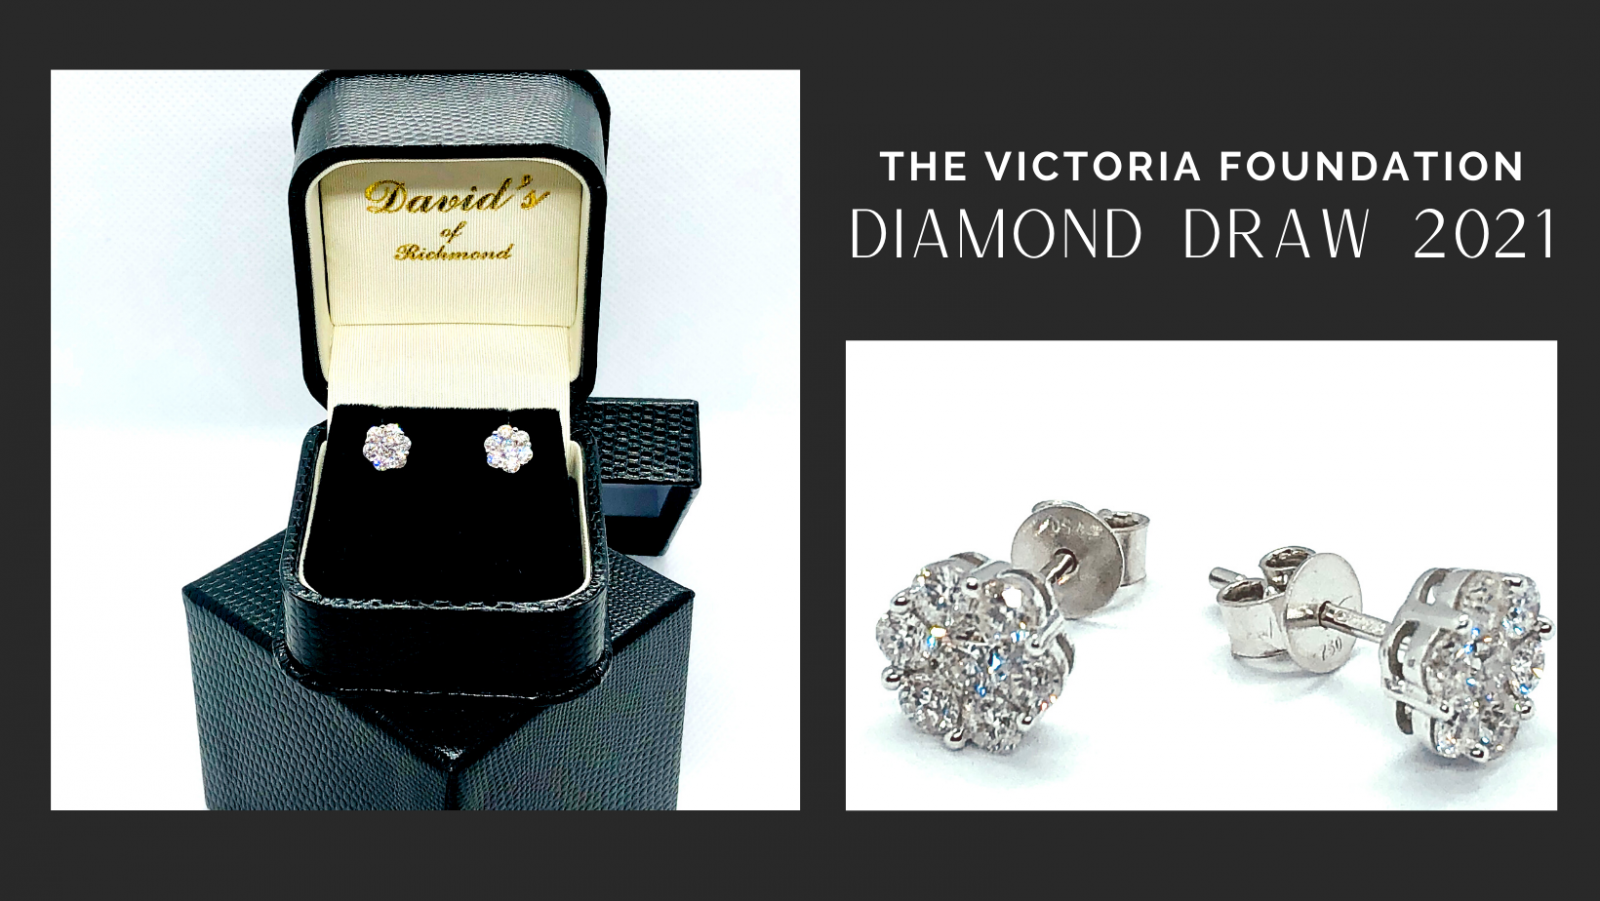 TVF's Diamond Draw is CLOSED - Congratulations to the winner of the Diamond Earrings and other prizes